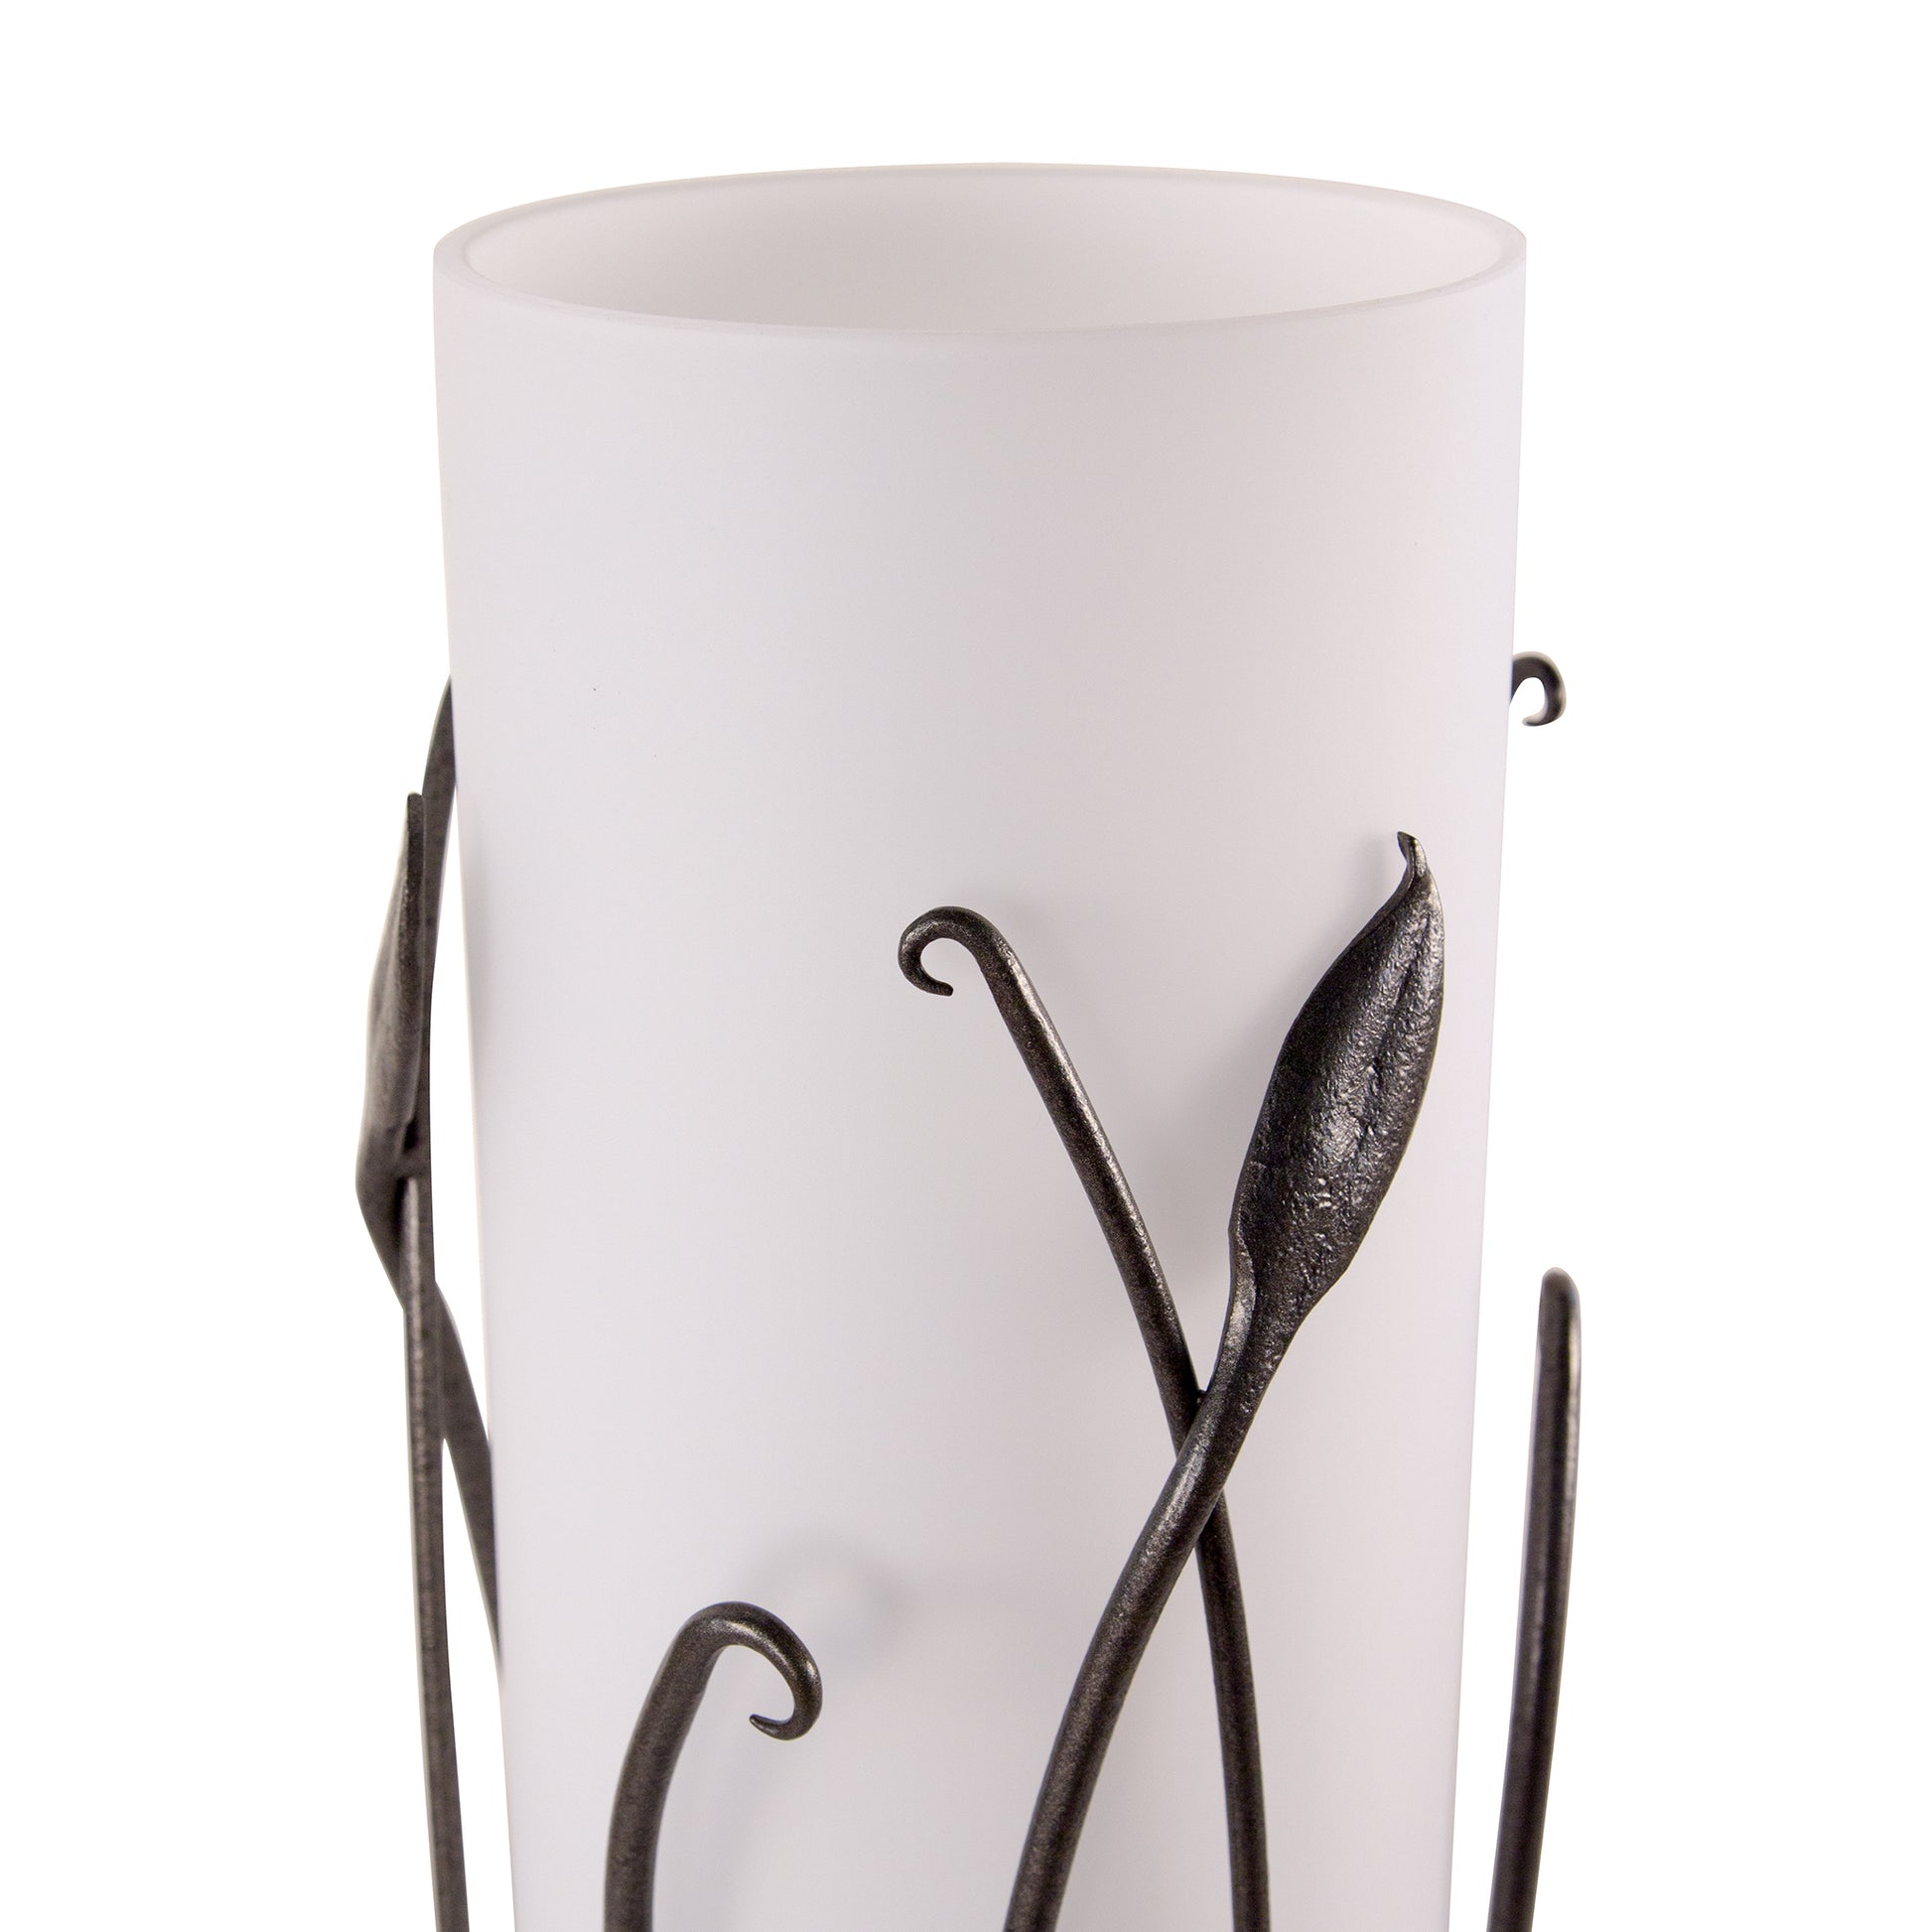 A Hubbardton Forge hand-made white vase with organic leaf design.